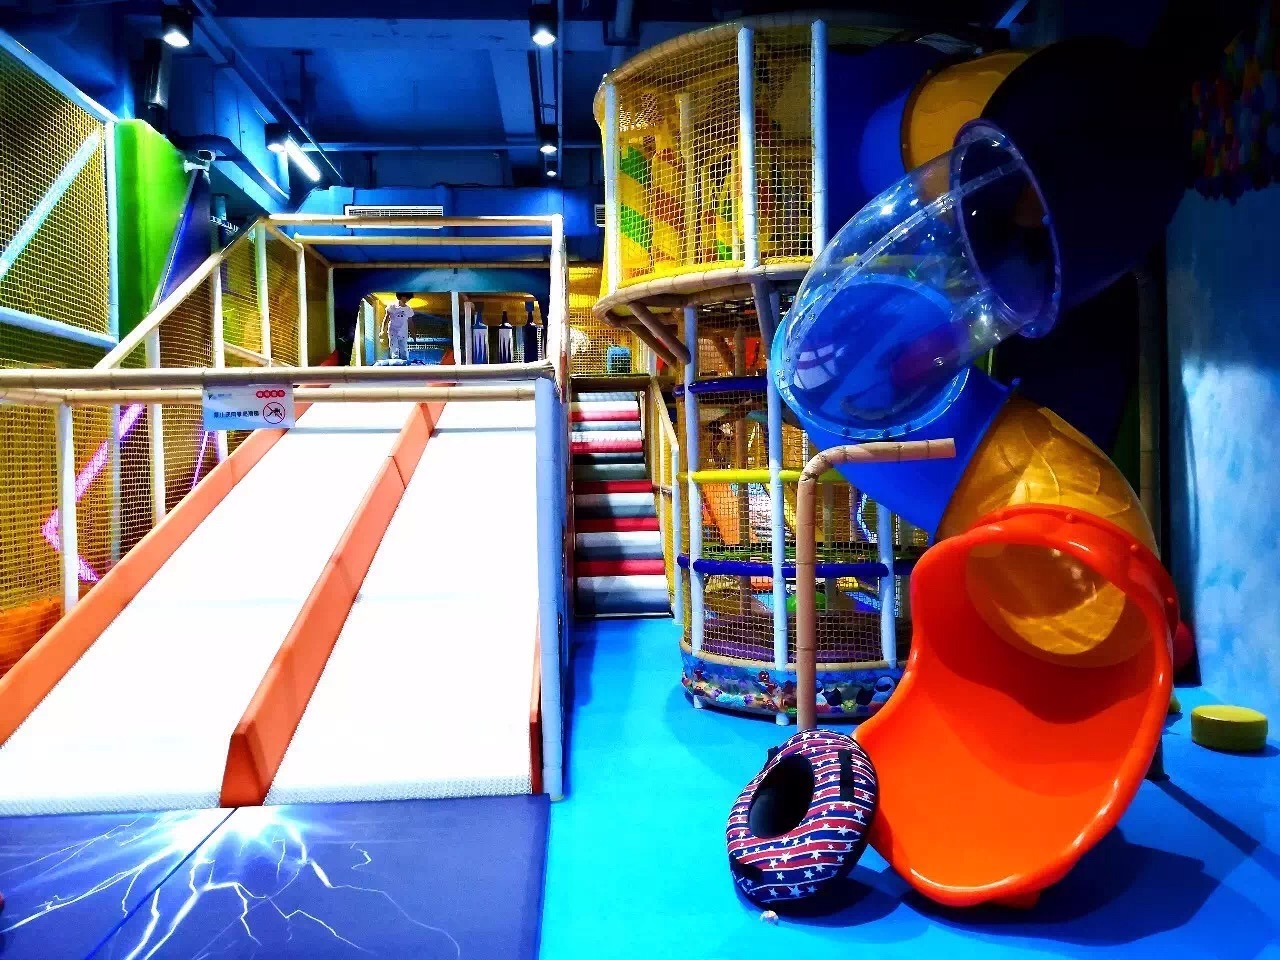 Be Careful about Potential Safety Hazards of Indoor Playground Equipment 